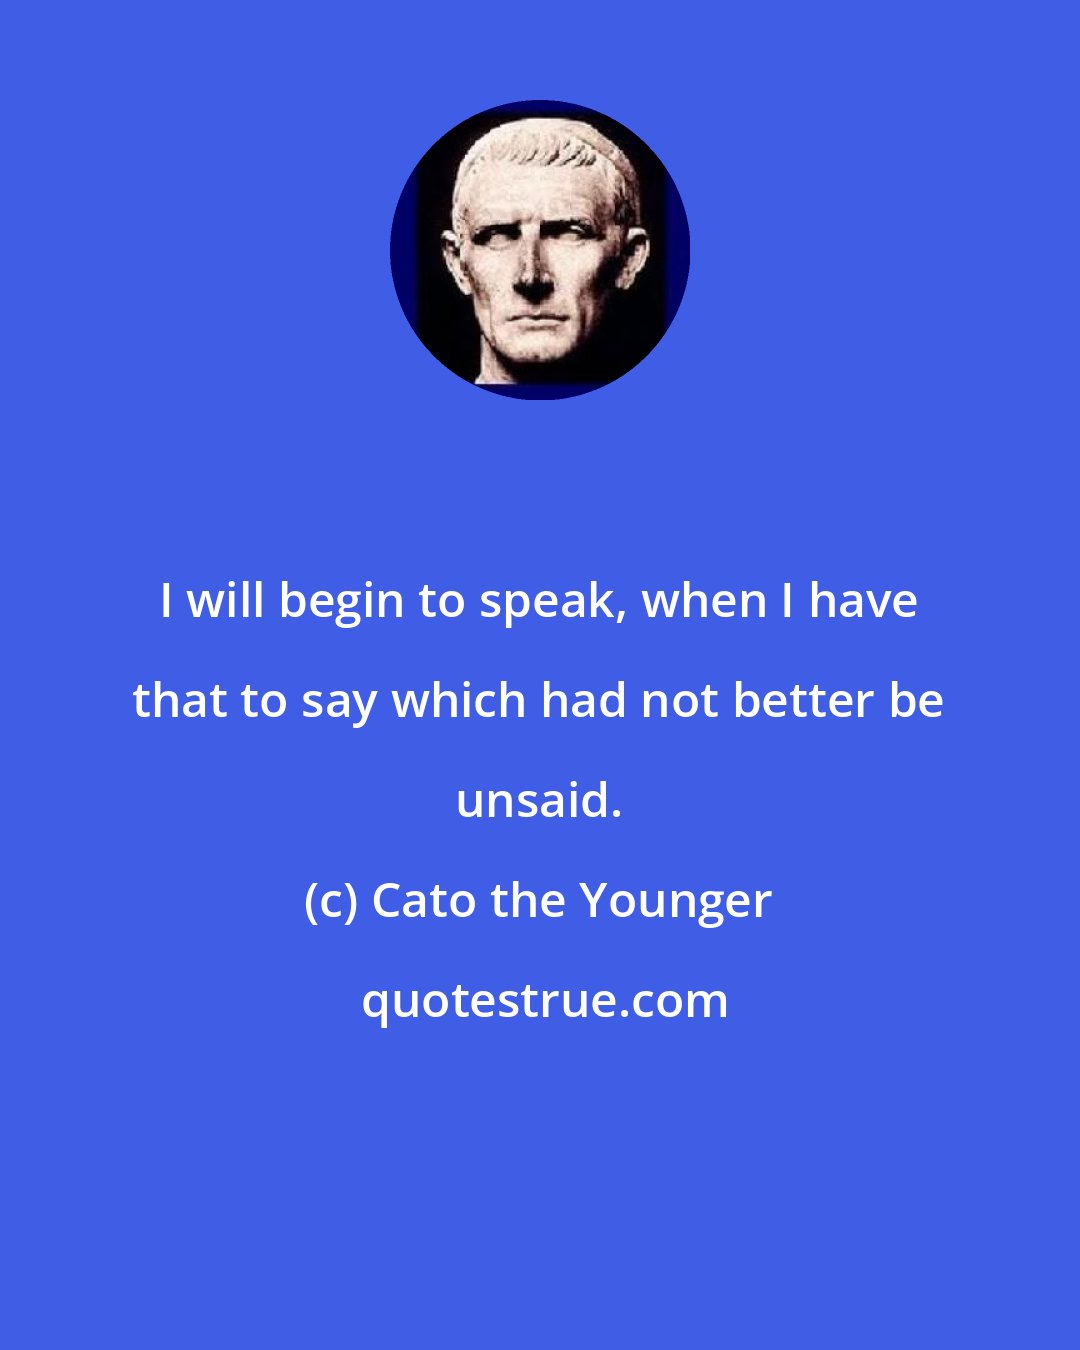 Cato the Younger: I will begin to speak, when I have that to say which had not better be unsaid.